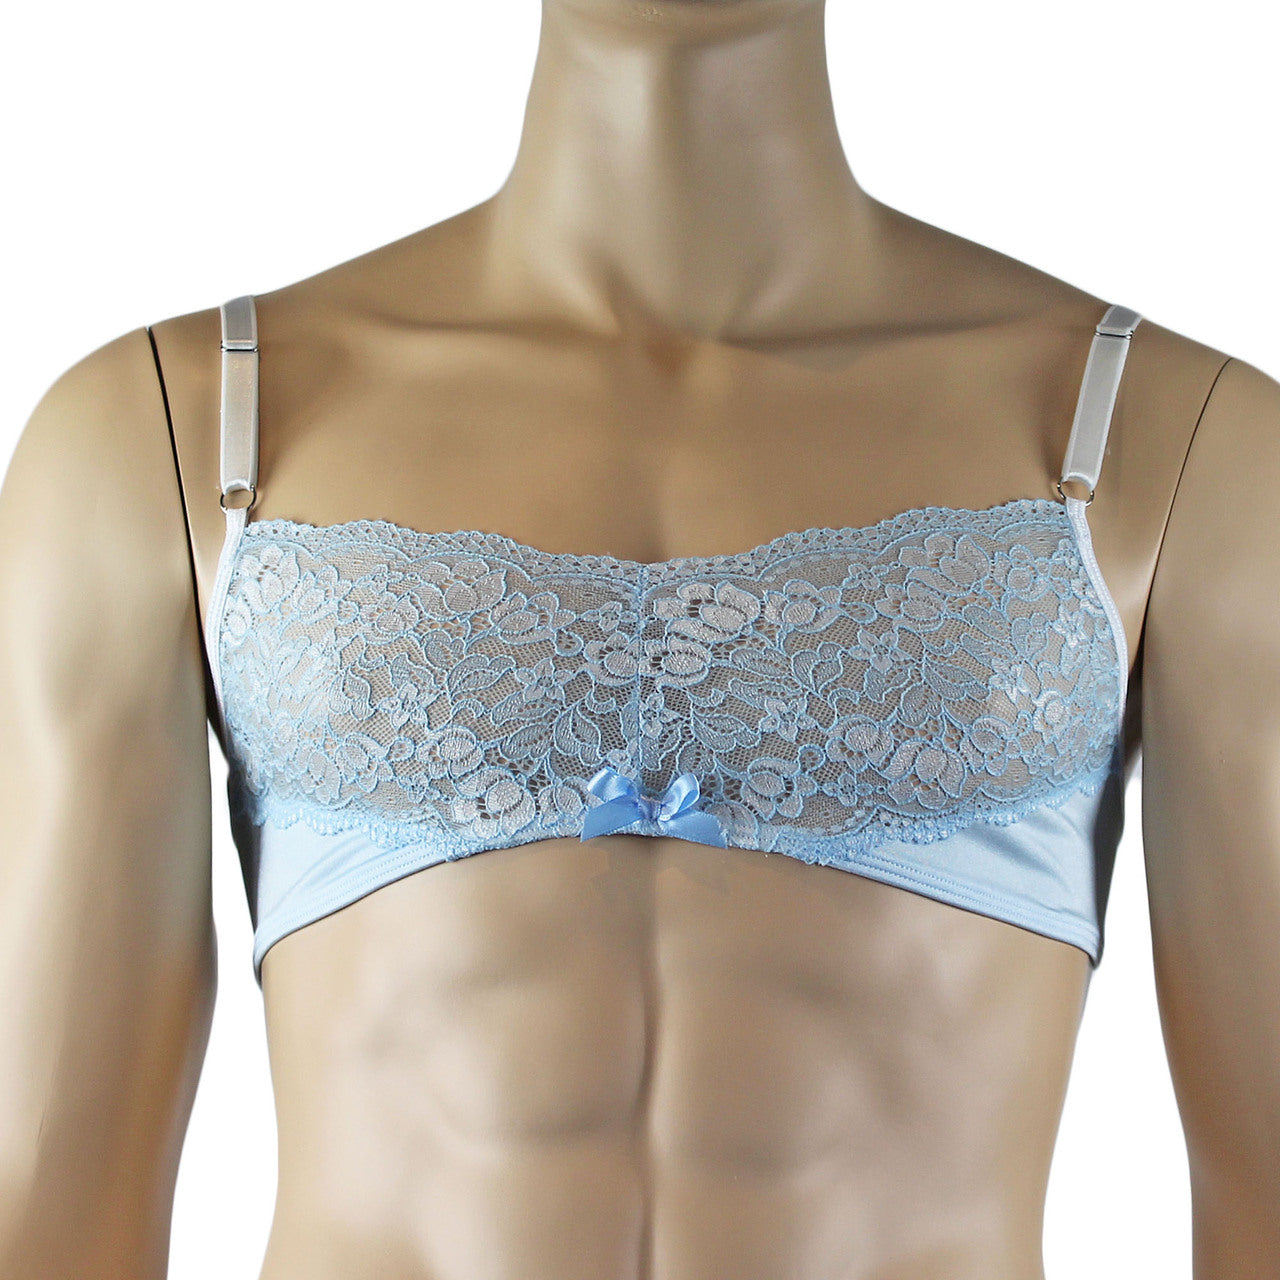 Mens Luxury Bra Top and Boxer Brief with Garters & Stockings (light blue plus other colours)